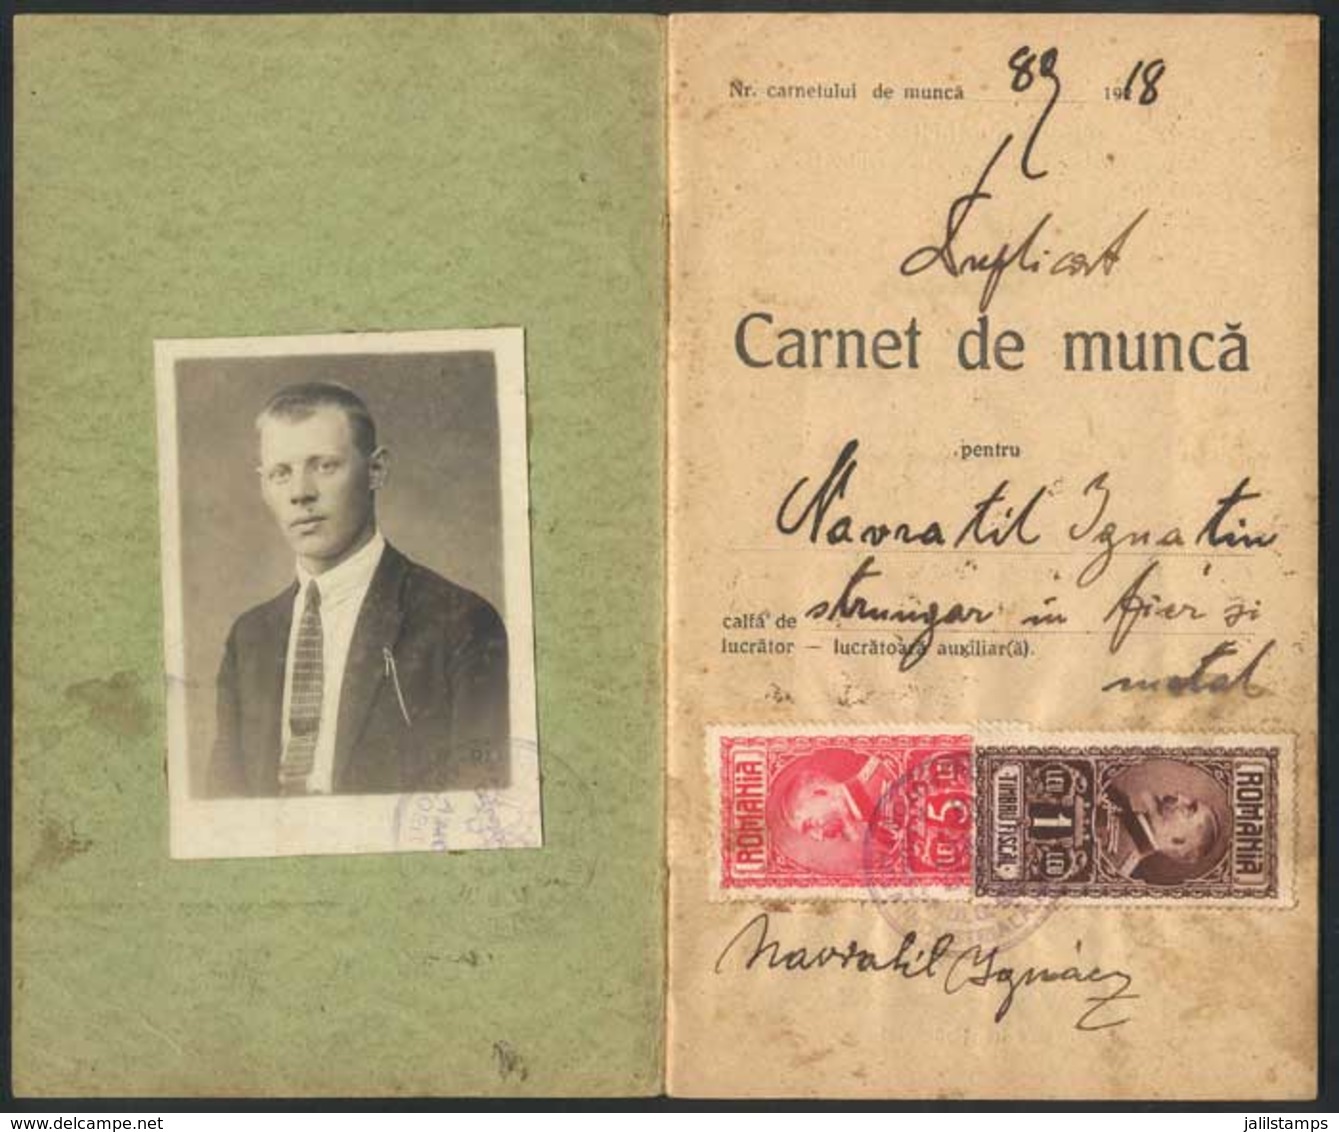 1452 ROMANIA: WORK BOOK (Carnet De Munca) Of The Year 1918 Of A Man That Emigrated To Arge - Unclassified